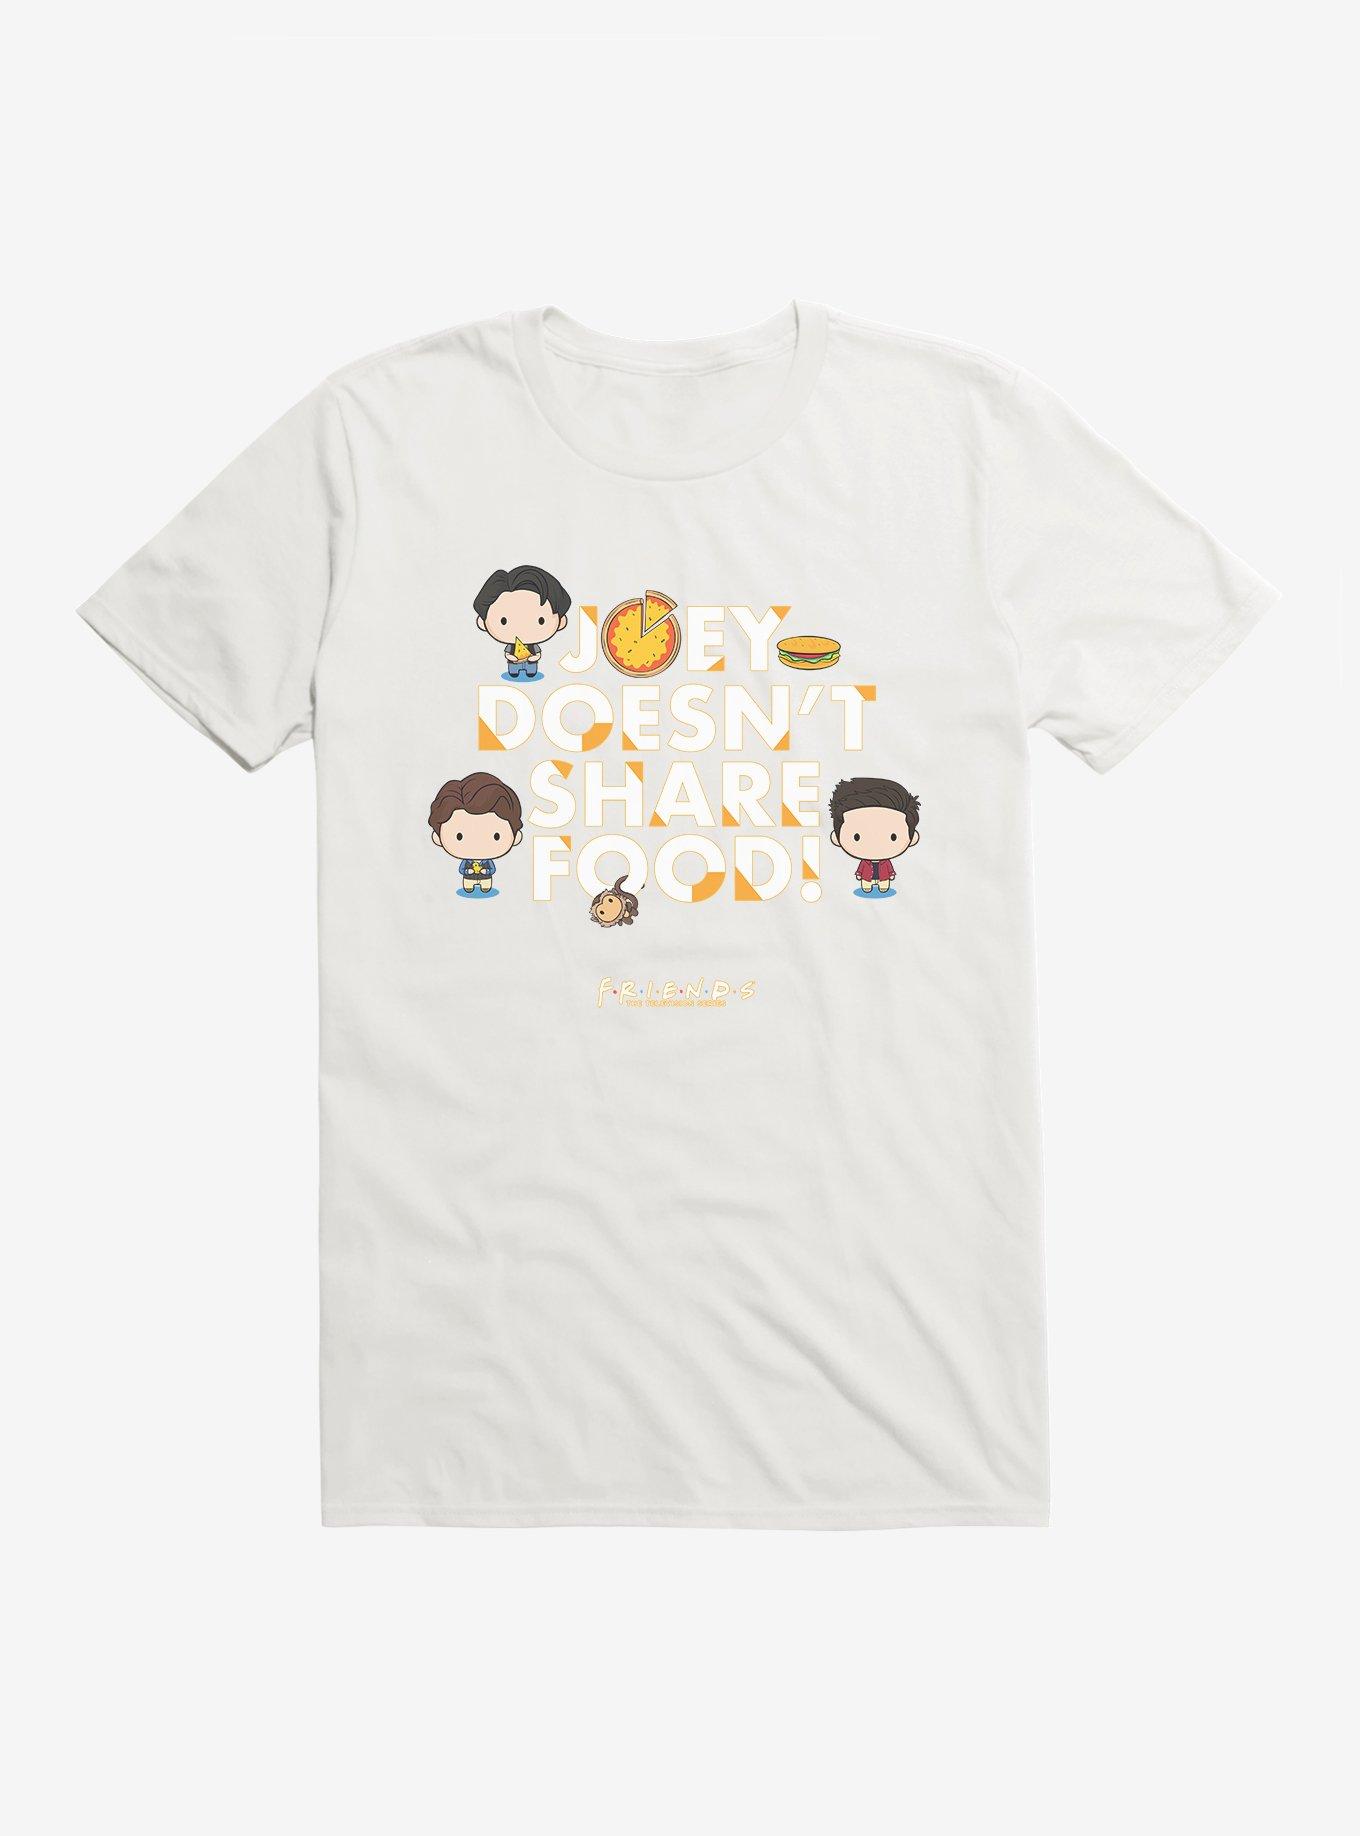 Friends Joey Doesn't Share Food T-Shirt, WHITE, hi-res